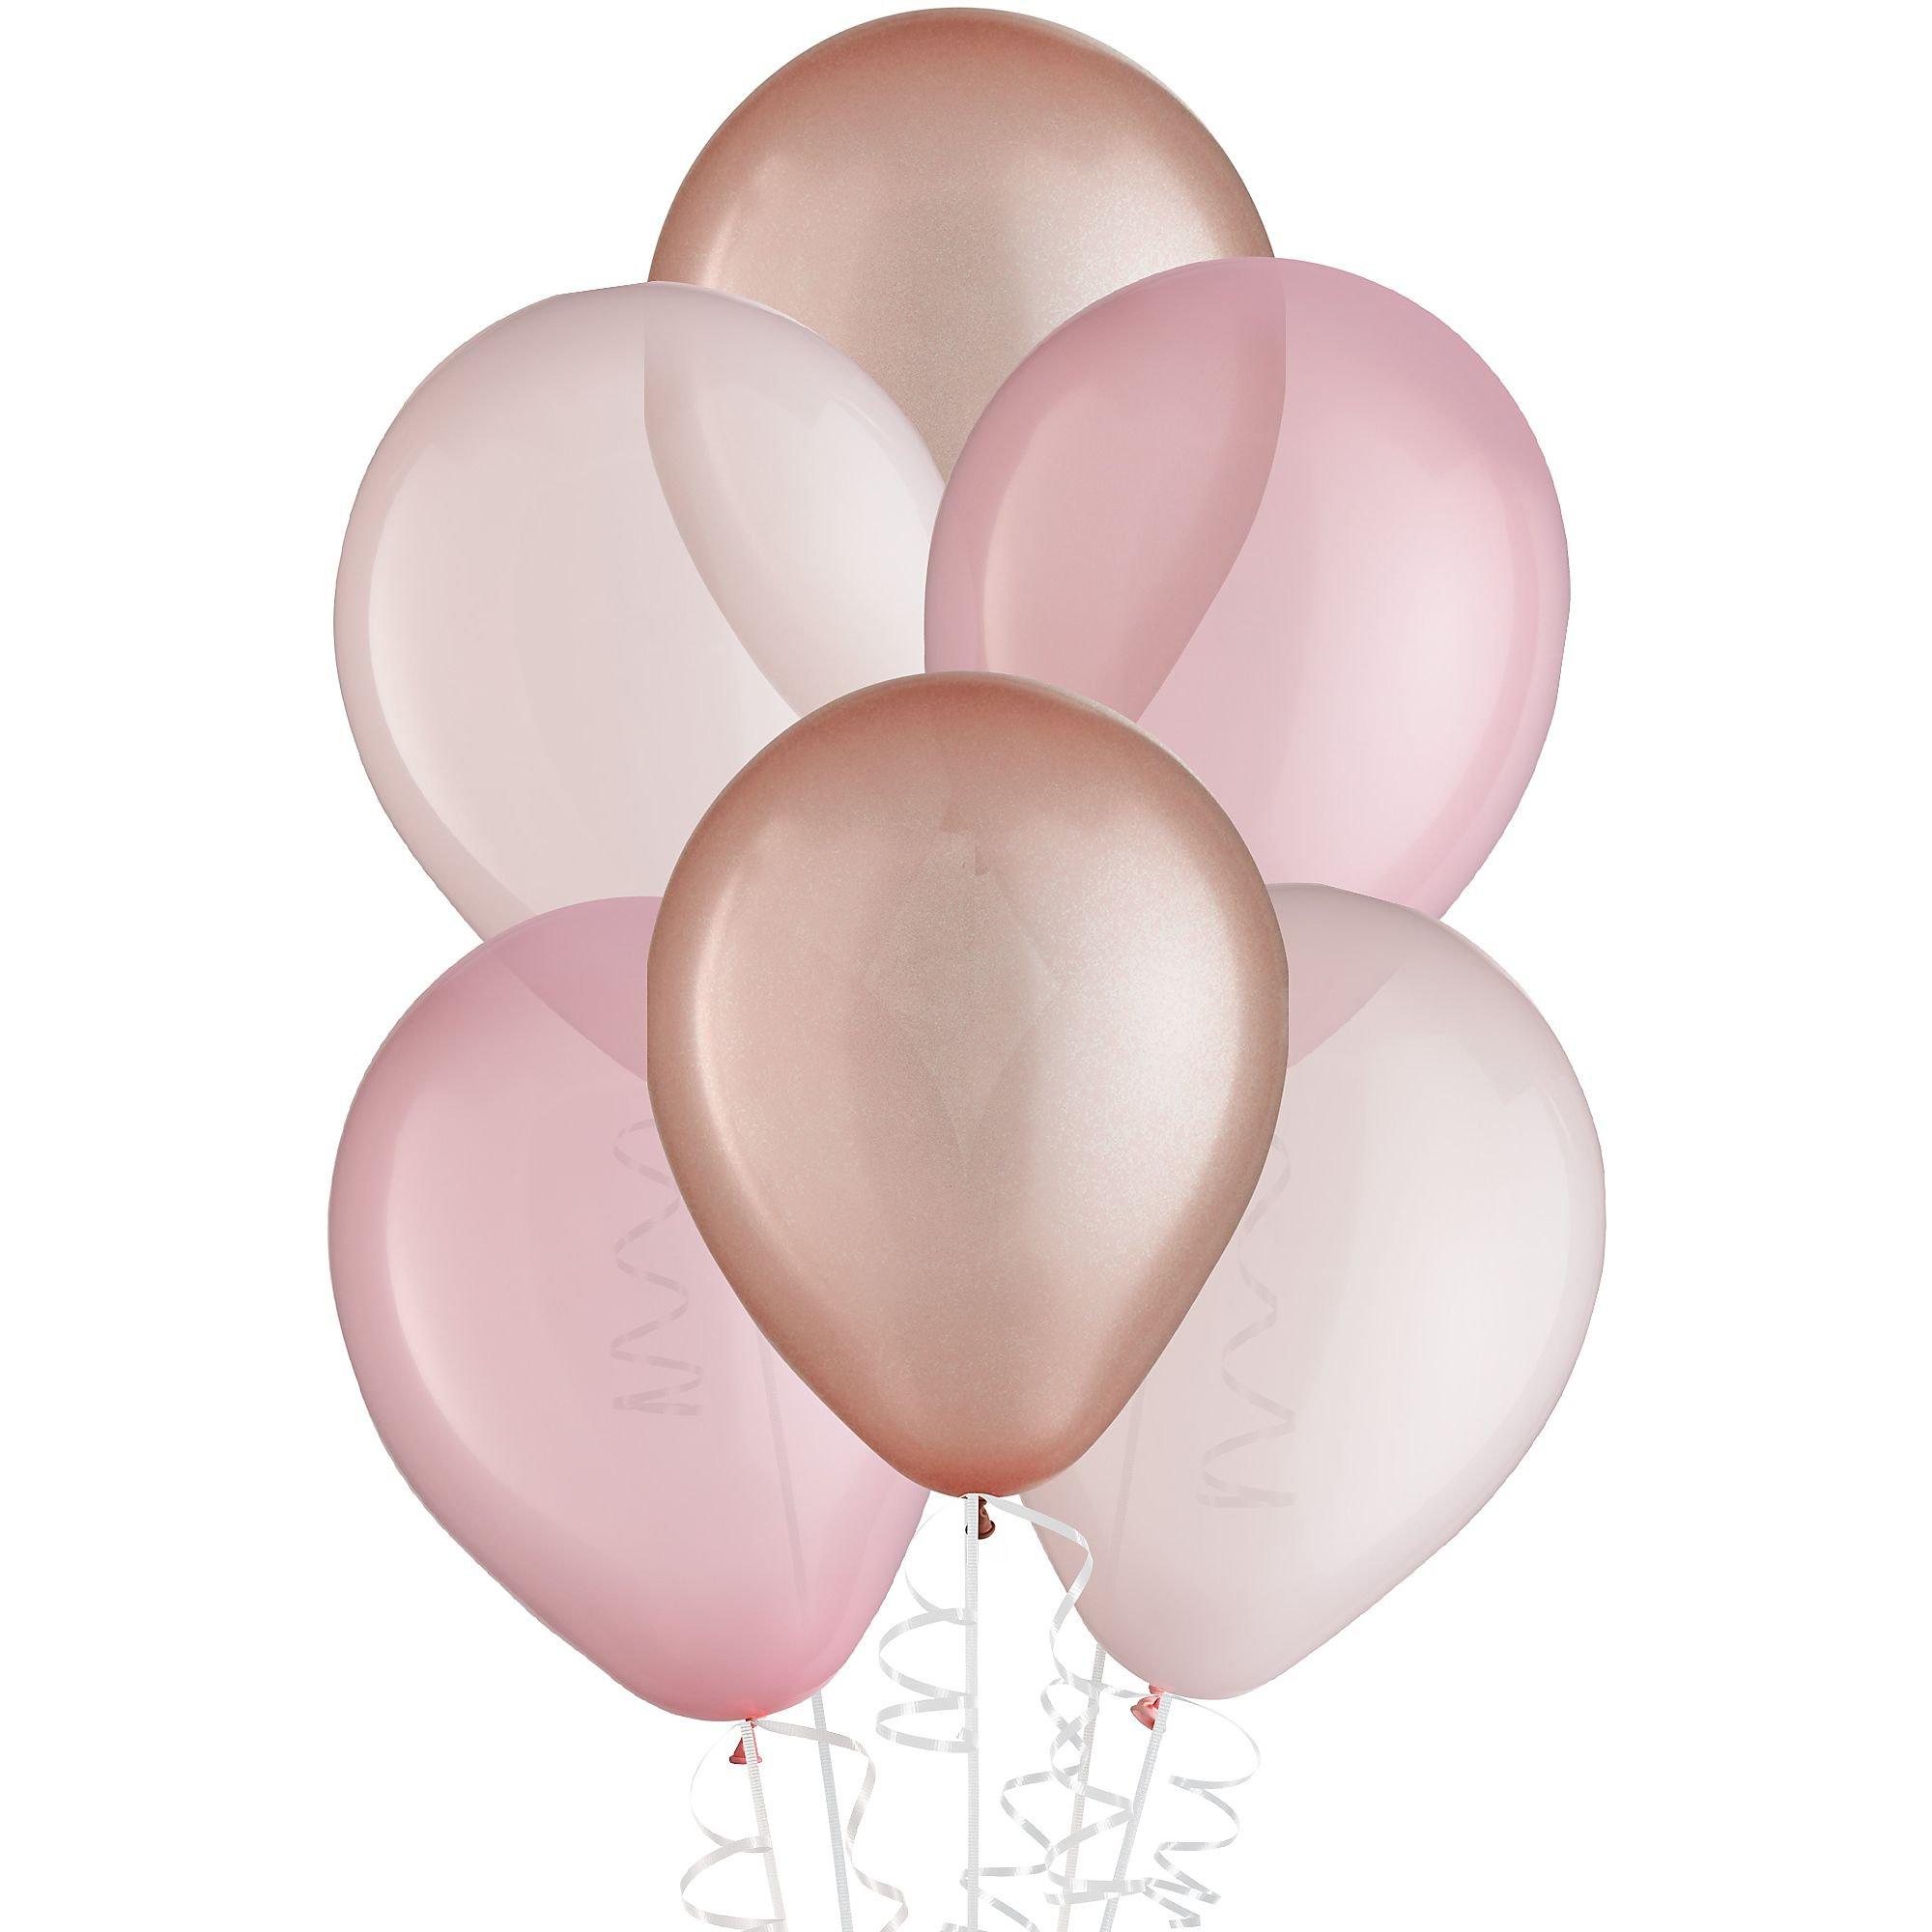 15ct, 11in, Rose Gold 3-Color Mix Latex Balloons - Pinks & Rose Gold